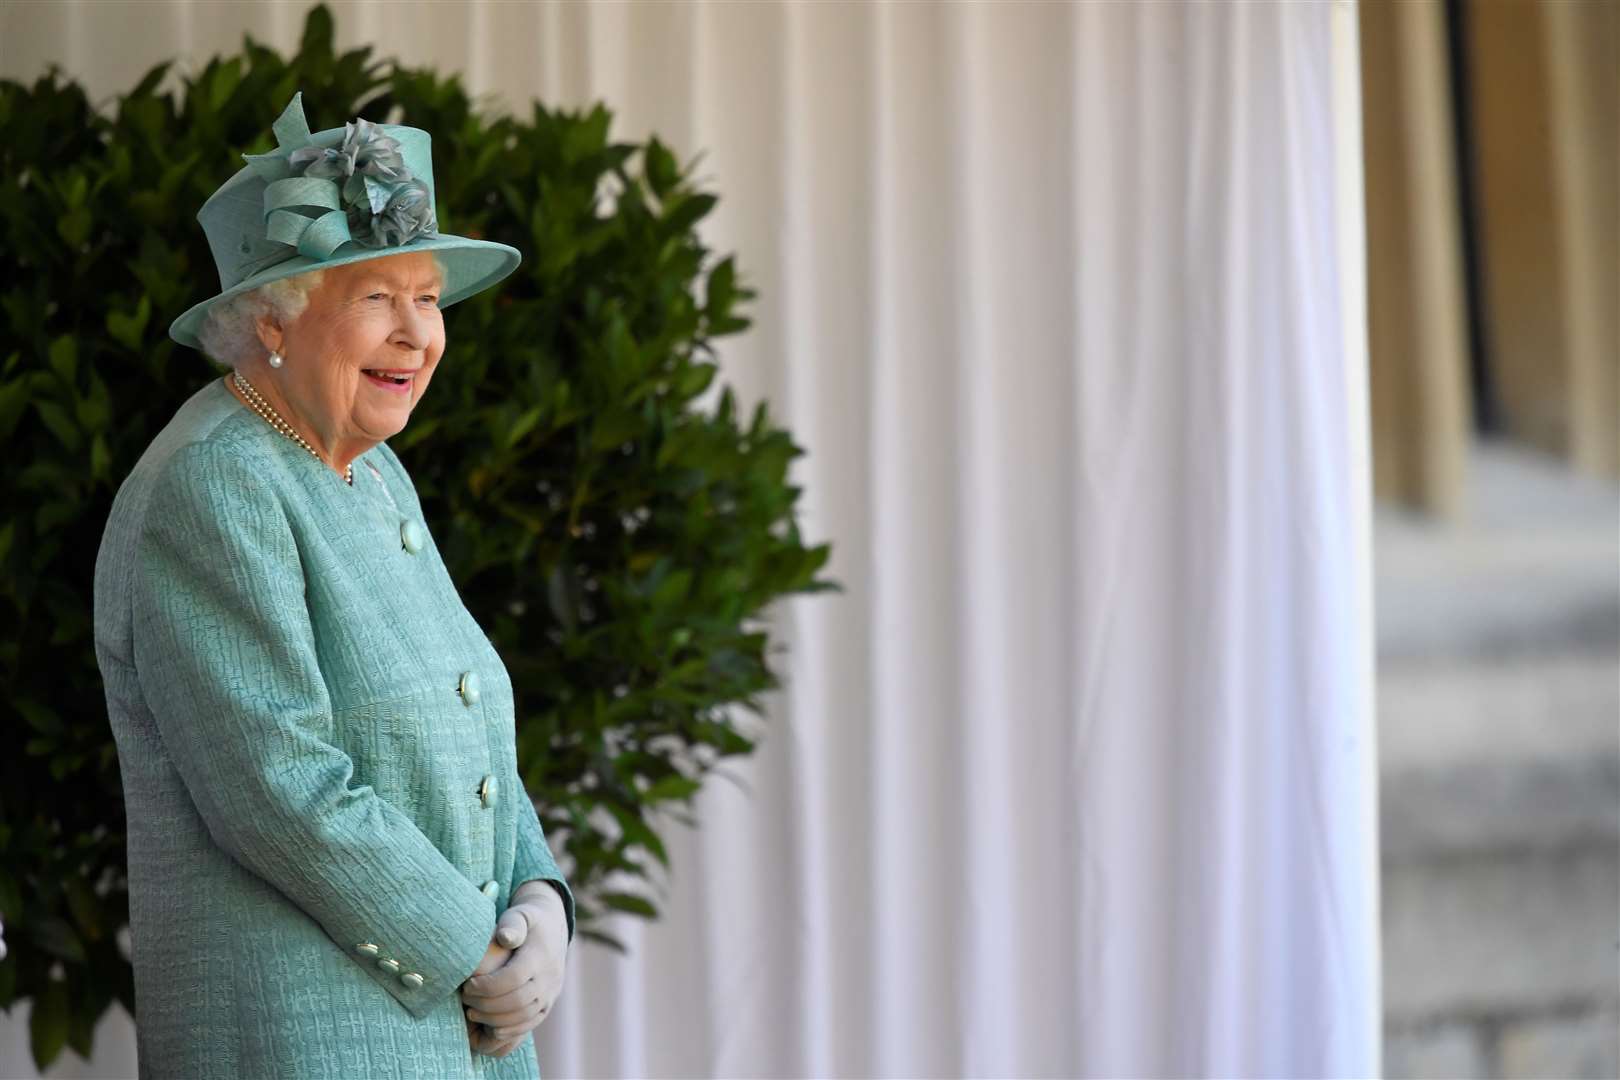 The Queen during a ceremony at Windsor to mark her official birthday in June (Toby Melville/PA)